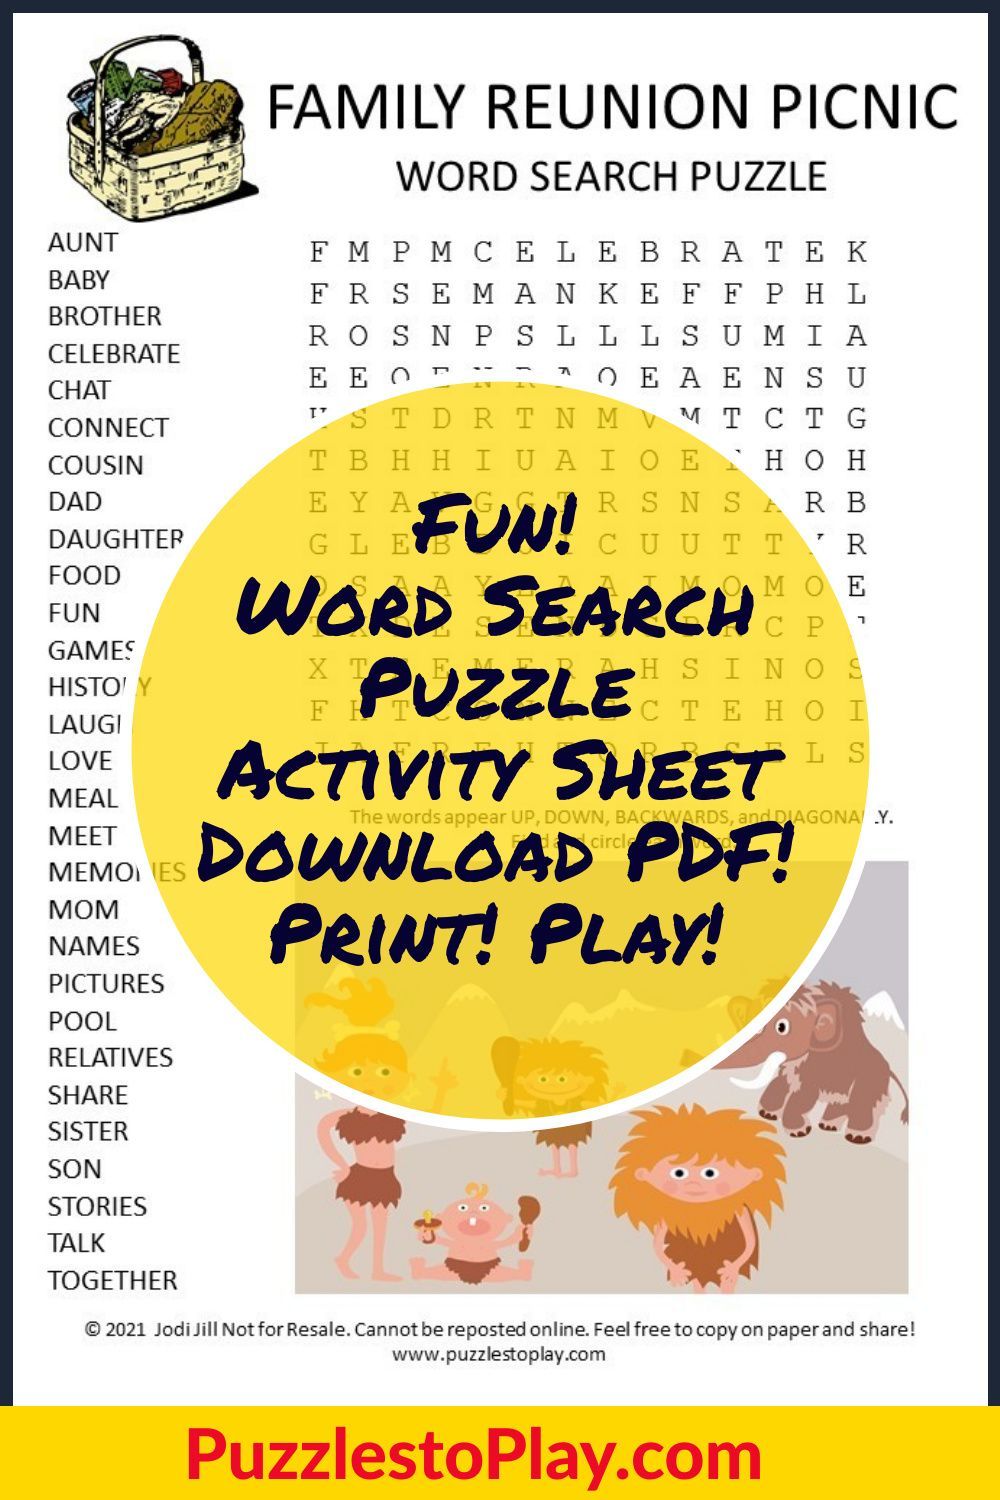 Family reunion picnic word search puzzle family reunion activities family reunion family reunion crafts